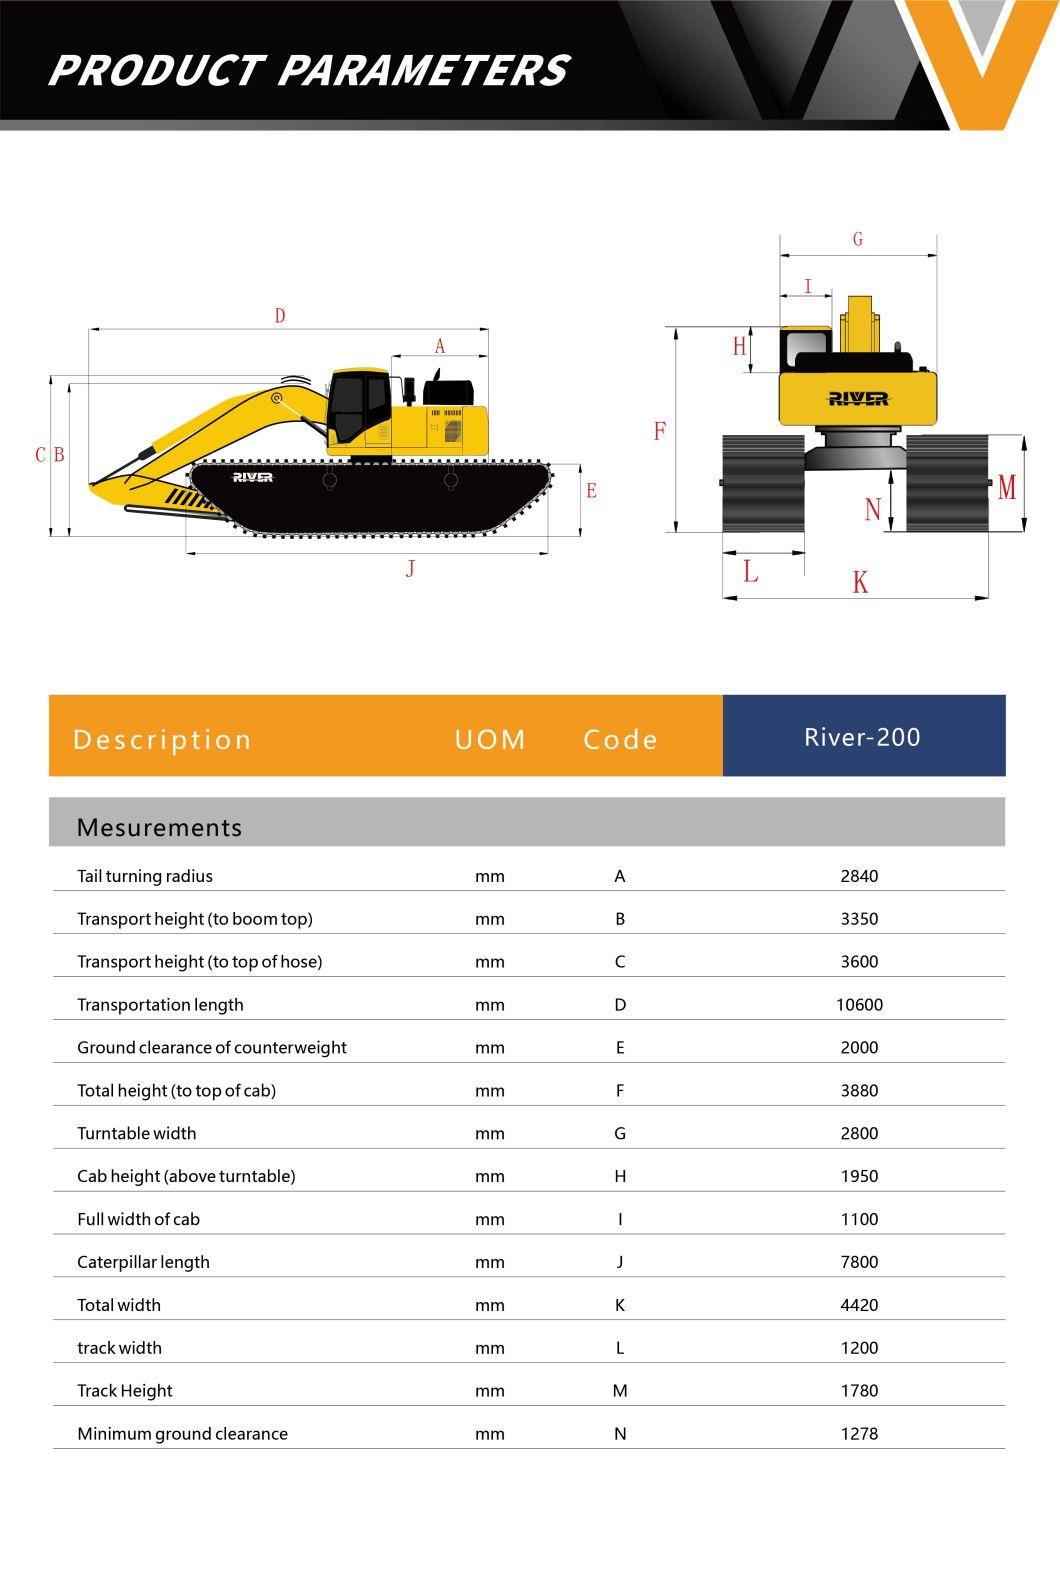 Good Quality Amphibious Dredging Excavator Second Hand Cat 320c Swamp Marsh Buggy with New Pontoon Undercarriage and 15m Long Arm